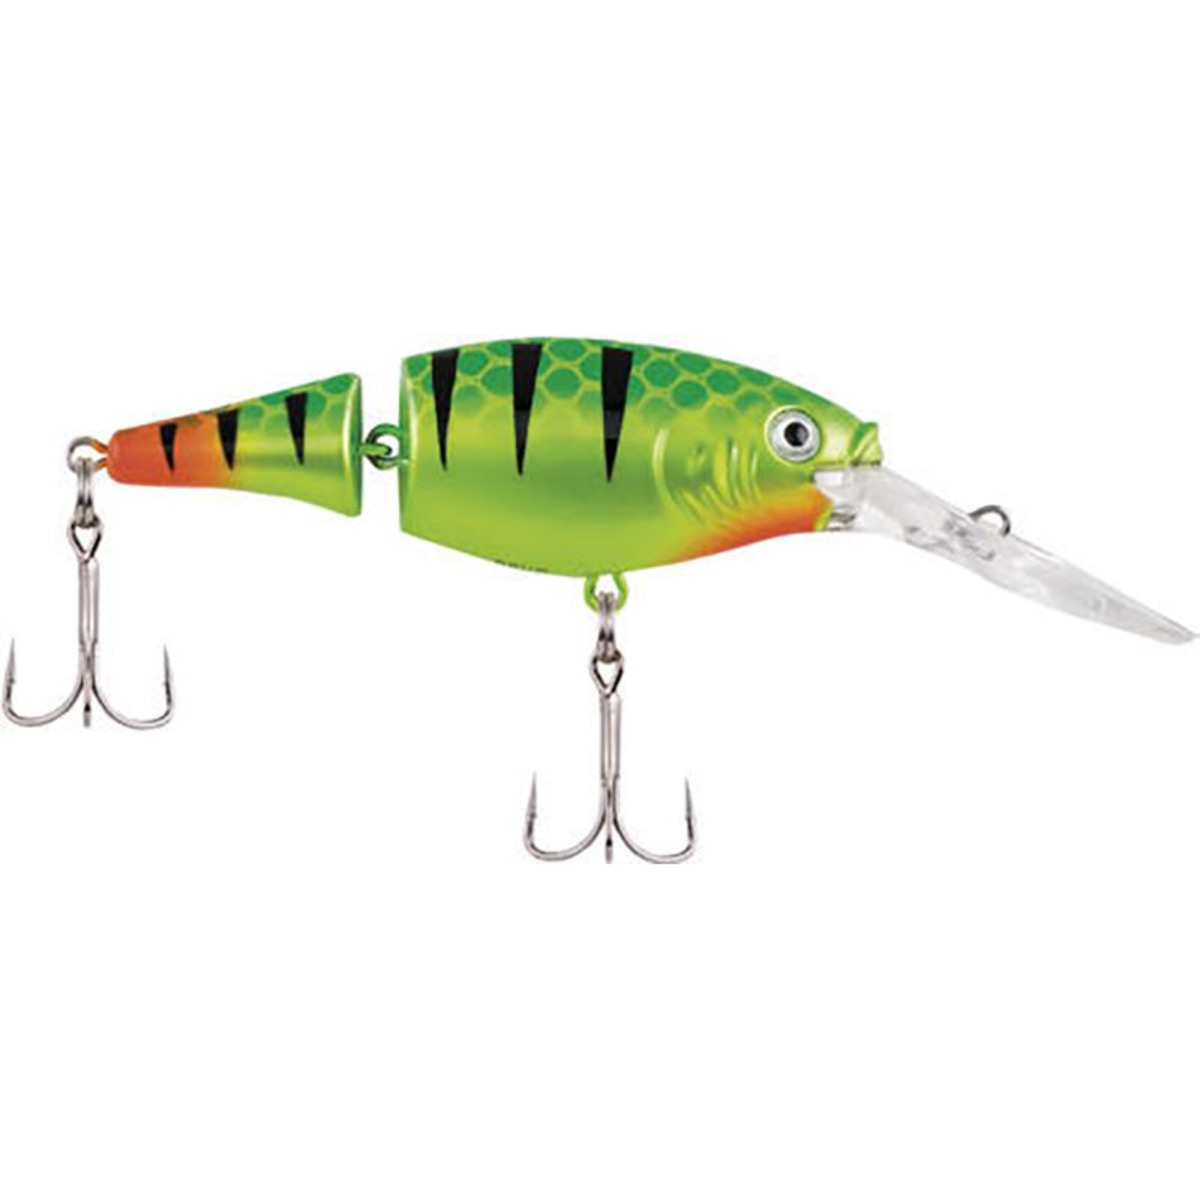 Berkley Flicker Shad Jointed Fire Tail - 5 cm - 6 g - Anti-Freeze